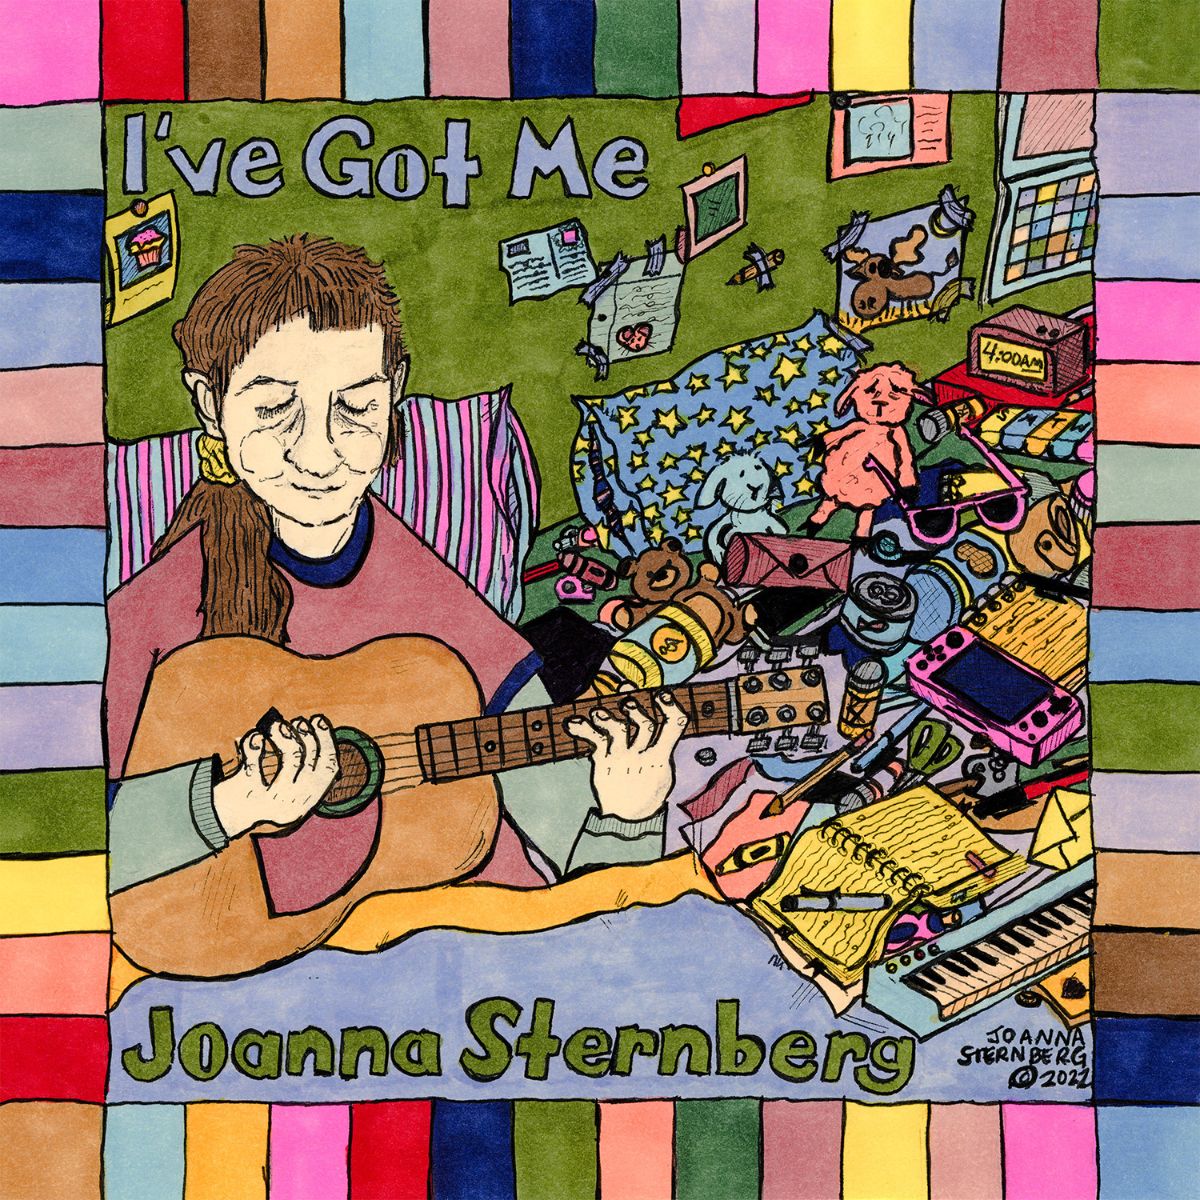 You are currently viewing Joanna Sternberg announces new album, I’ve Got Me & releases the title track/video